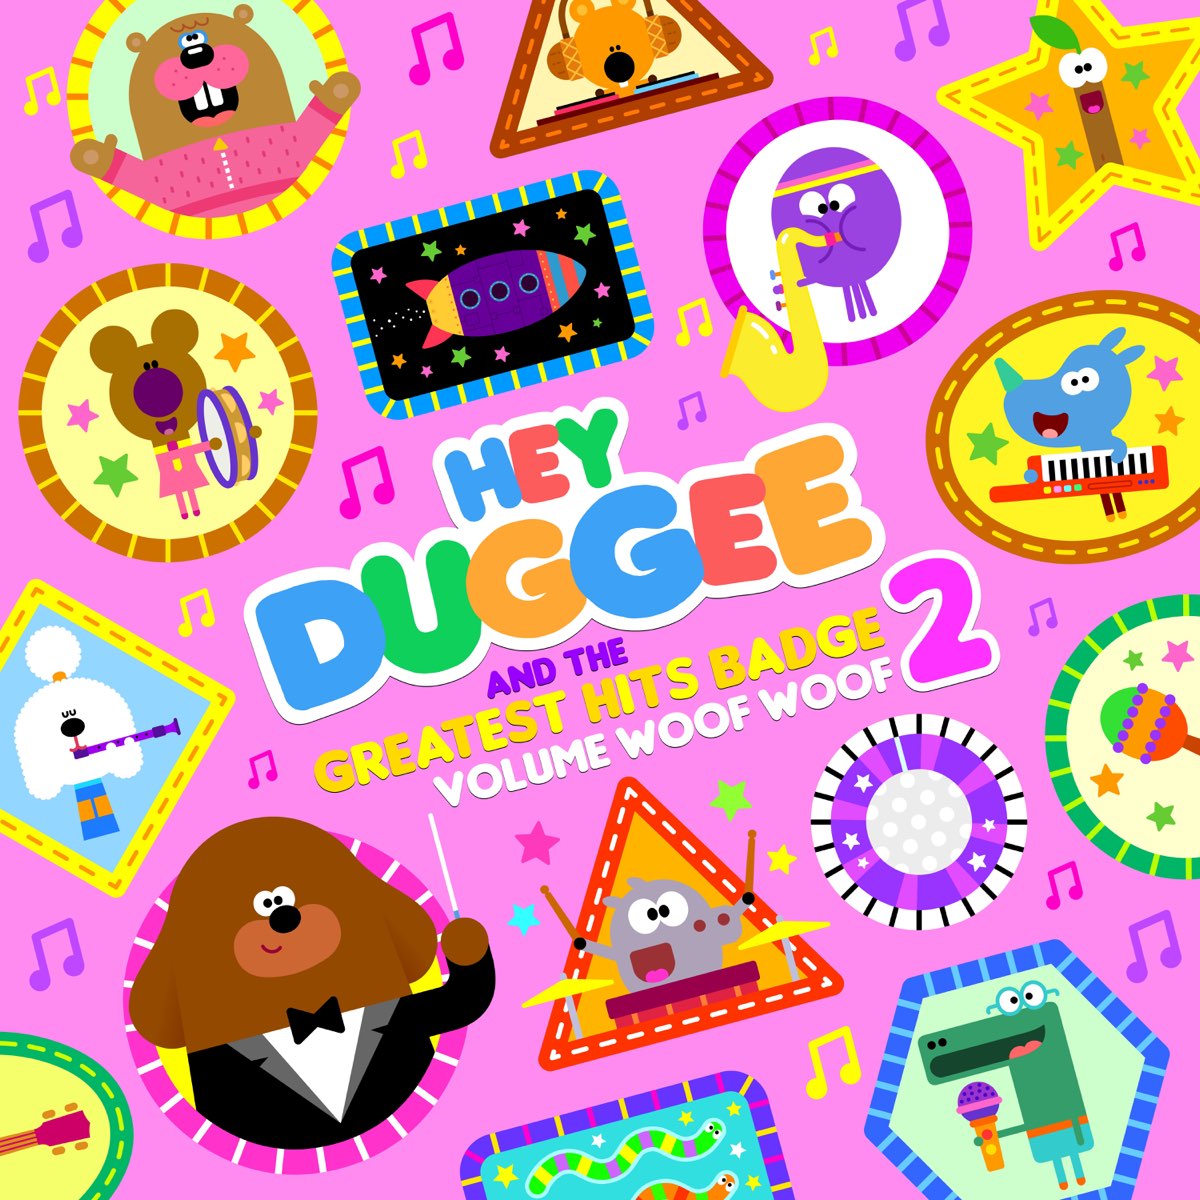 Hey Duggee & the Greatest Hits Badge (Volume Woof Woof) by Duggee & The  Squirrels on Apple Music